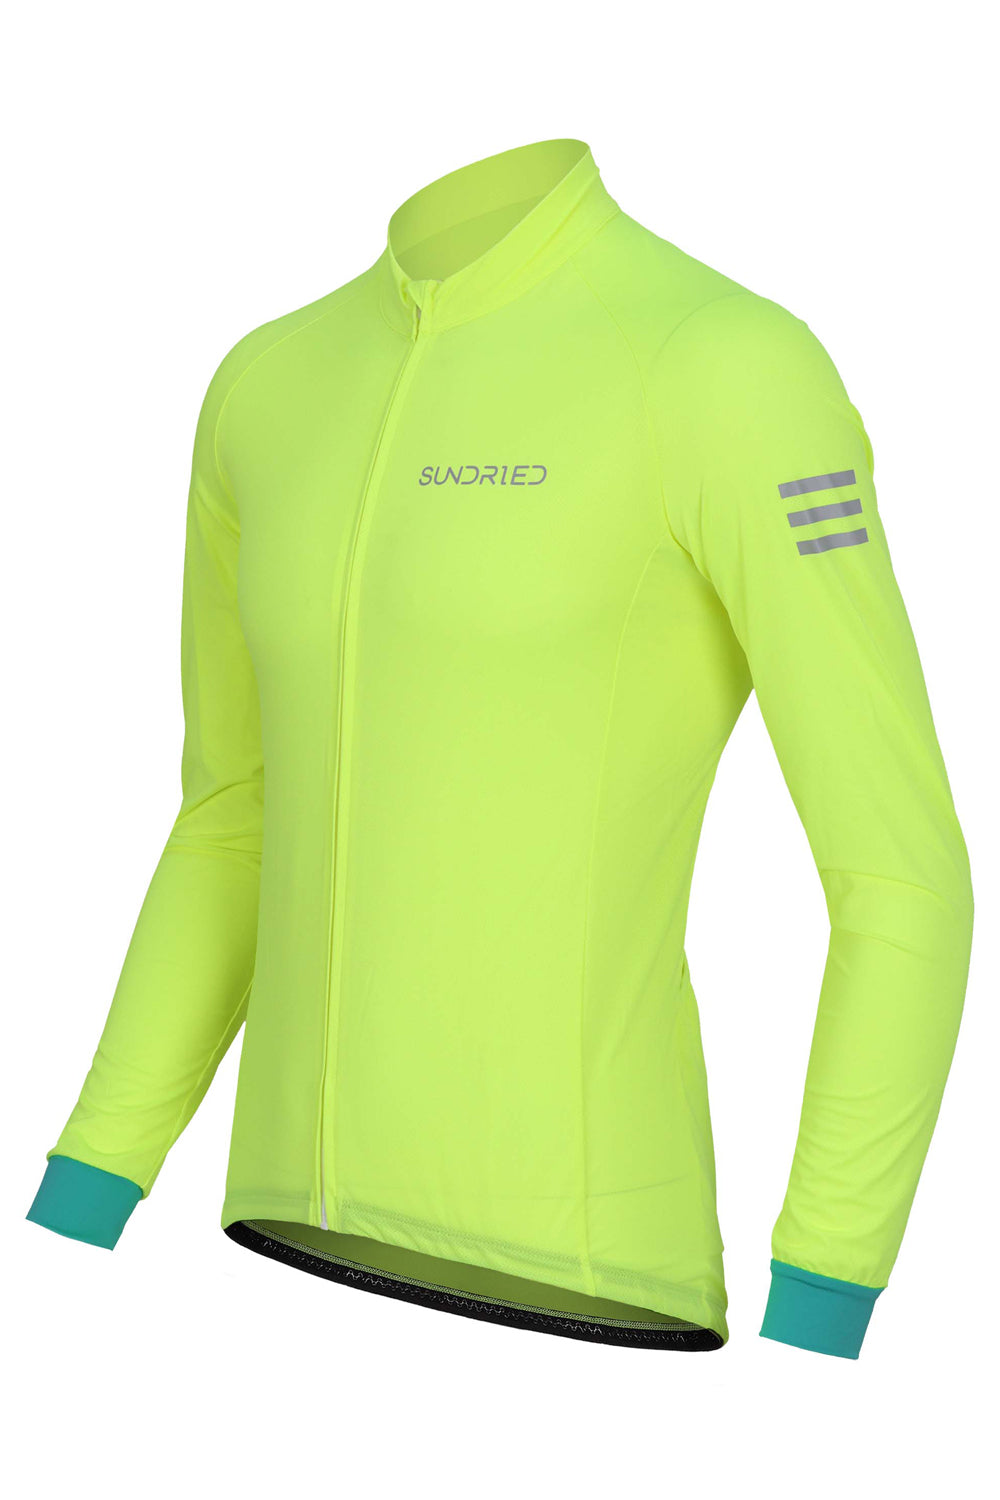 Sundried Apex Men's Long Sleeve Cycle Jersey Long Sleeve Jersey Activewear